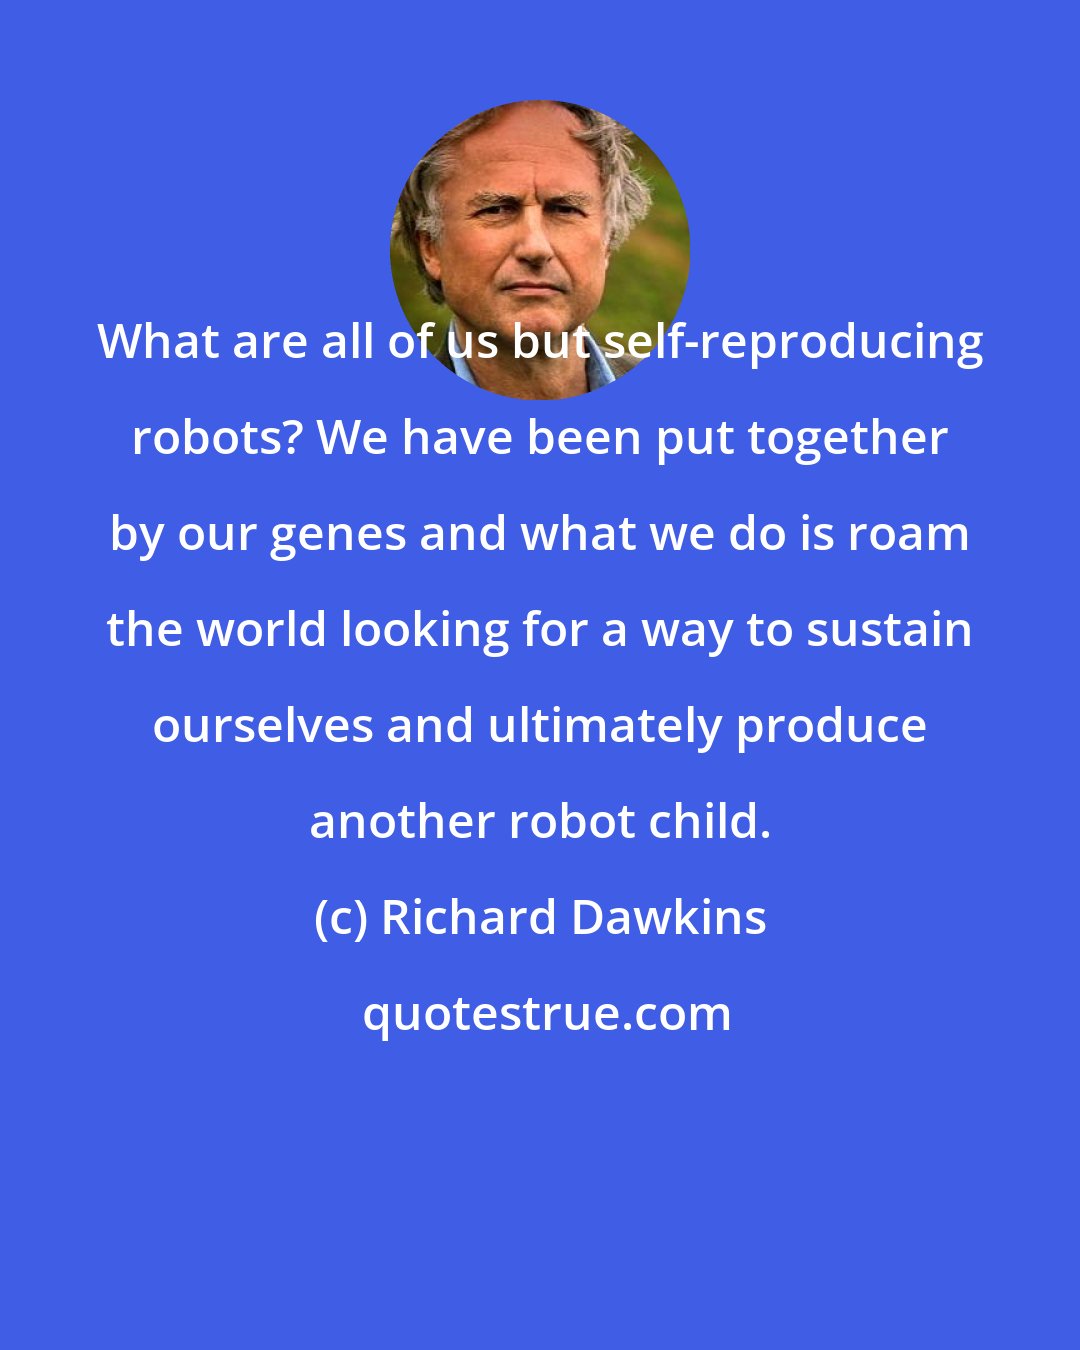 Richard Dawkins: What are all of us but self-reproducing robots? We have been put together by our genes and what we do is roam the world looking for a way to sustain ourselves and ultimately produce another robot child.